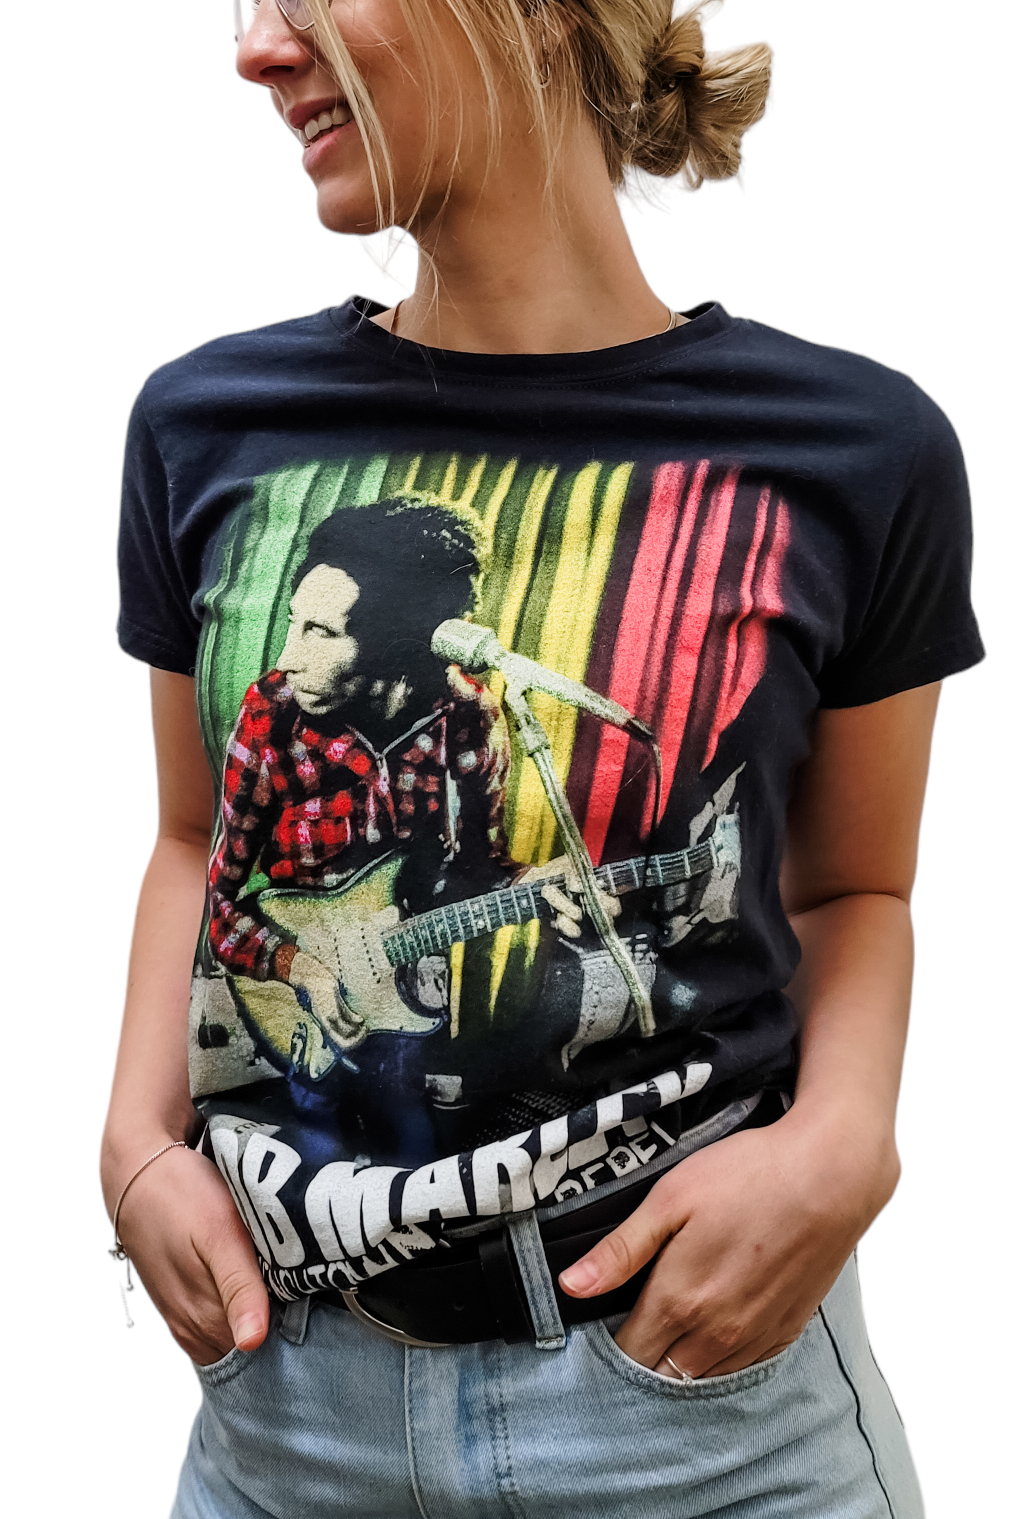 Bob Marley Trench Town Soul Rebel Black Vintage Graphic Tee